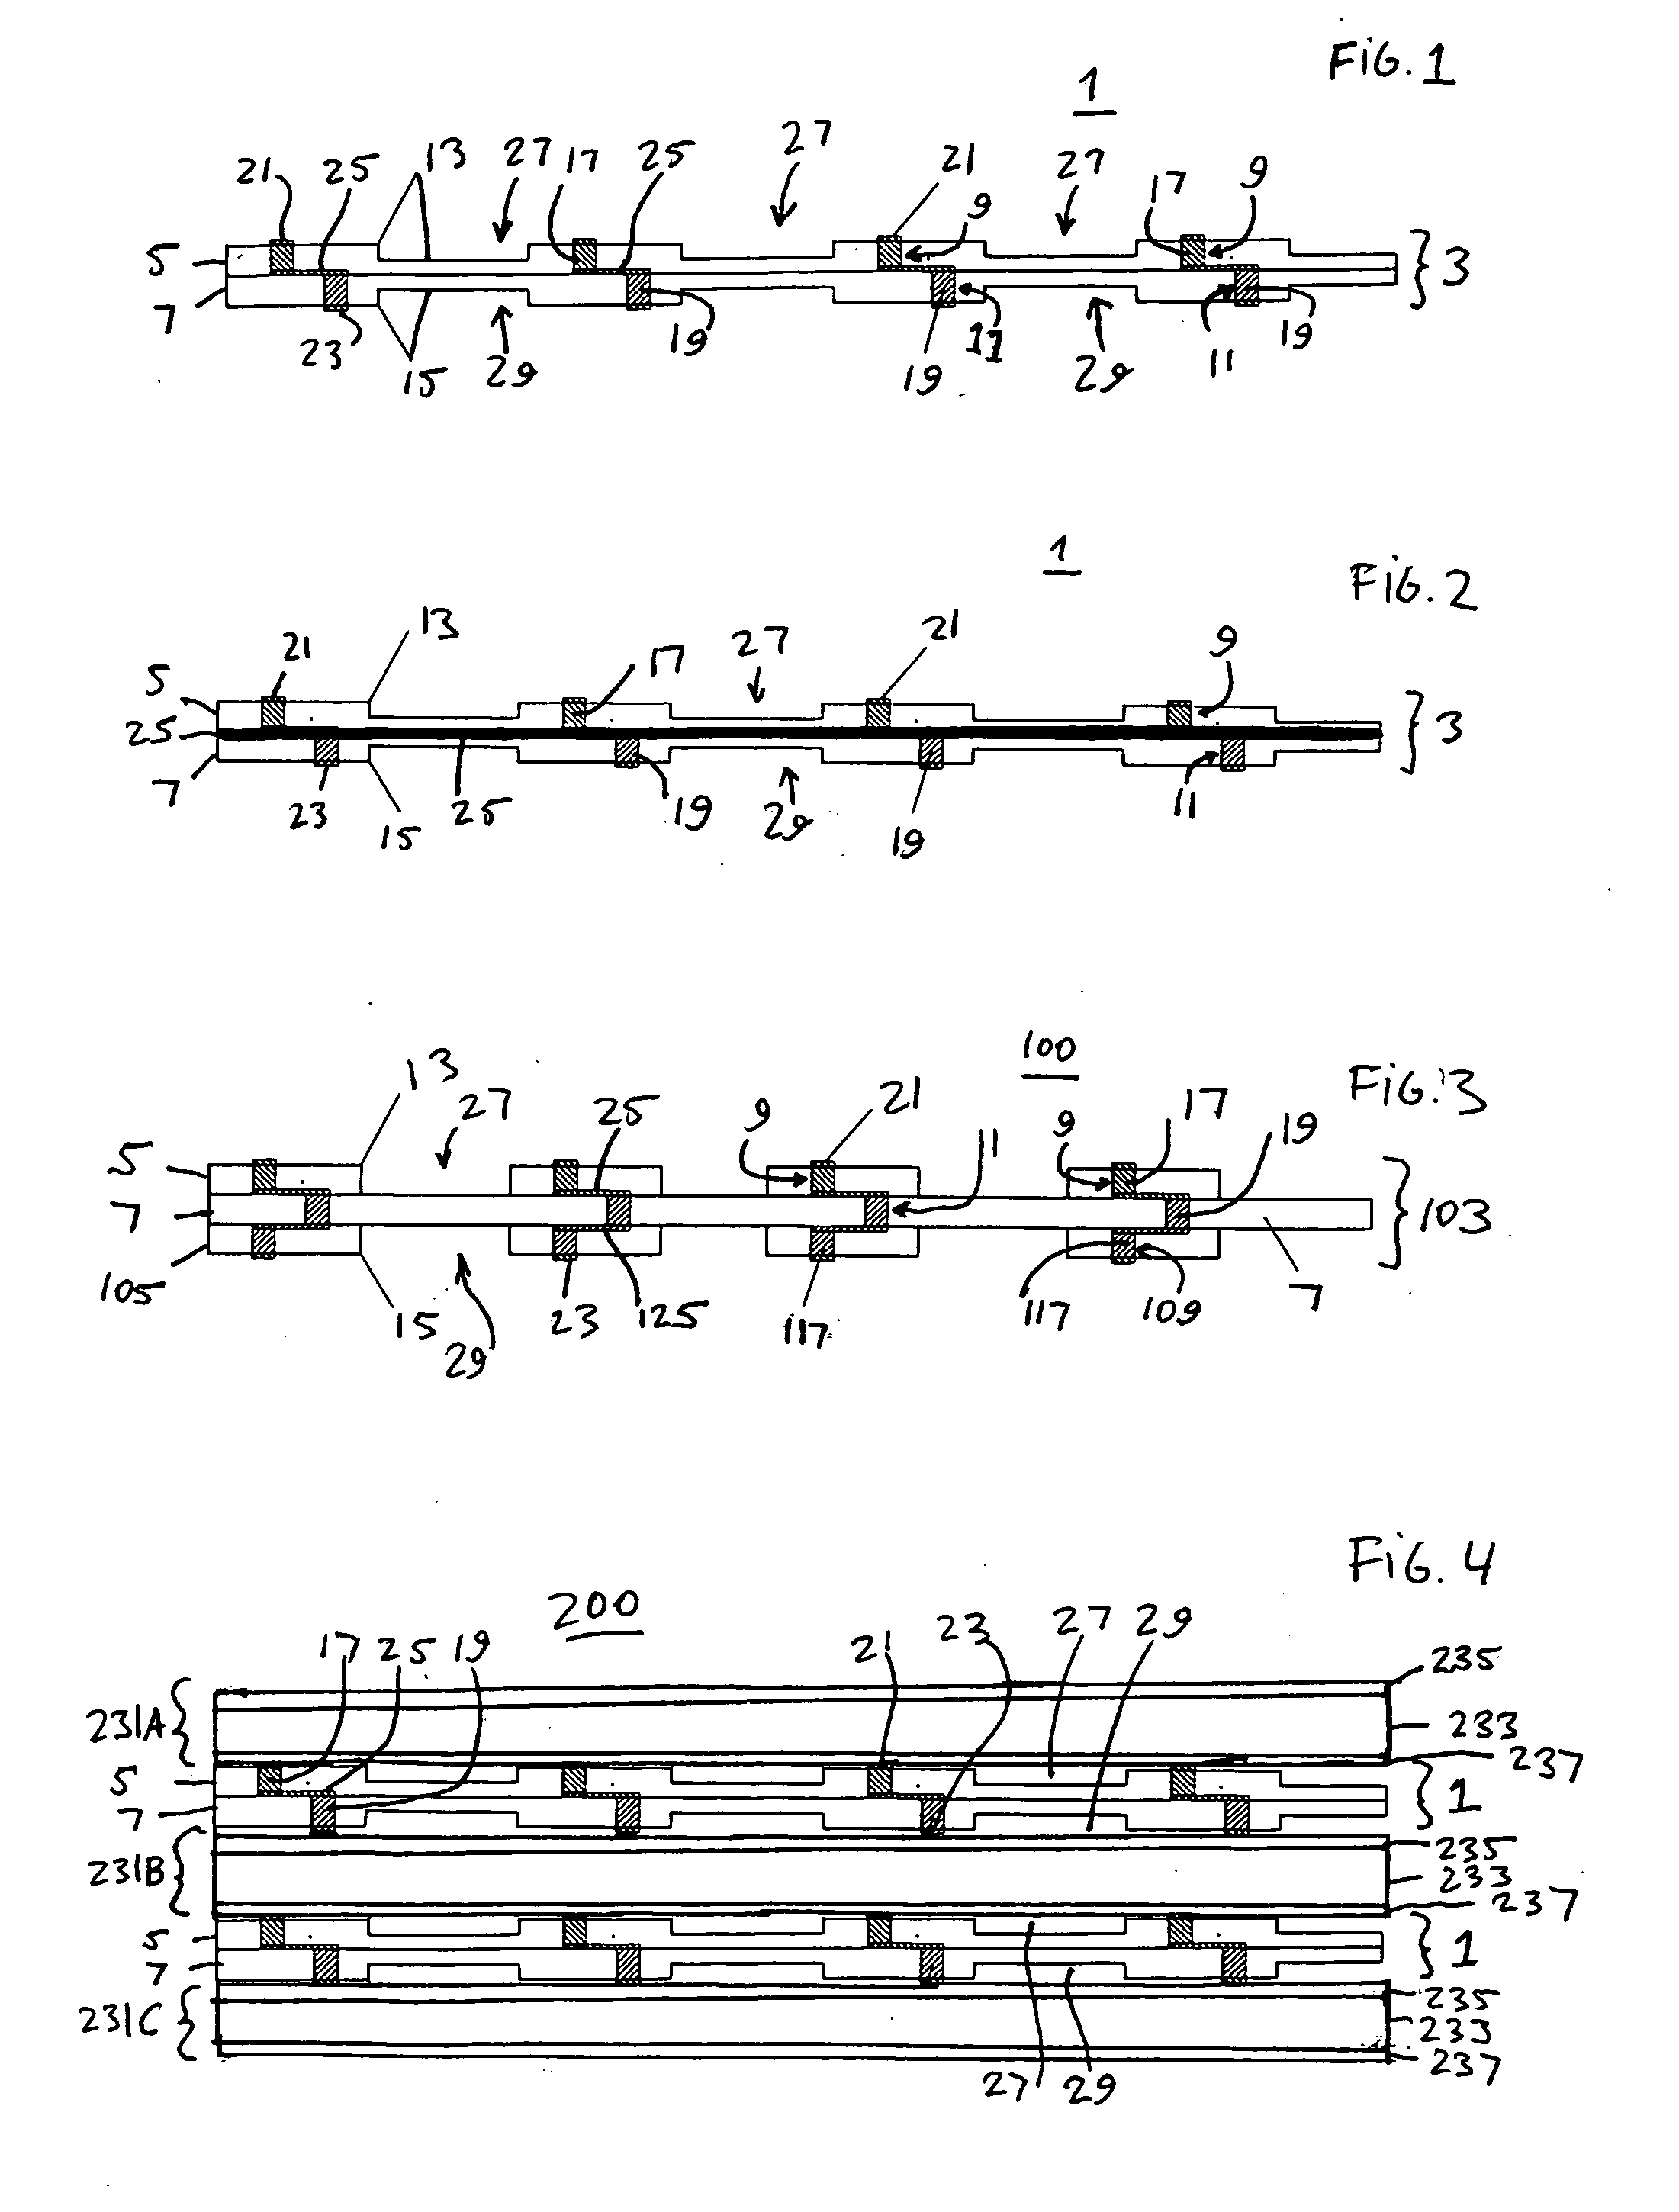 Offset interconnect for a solid oxide fuel cell and method of making same